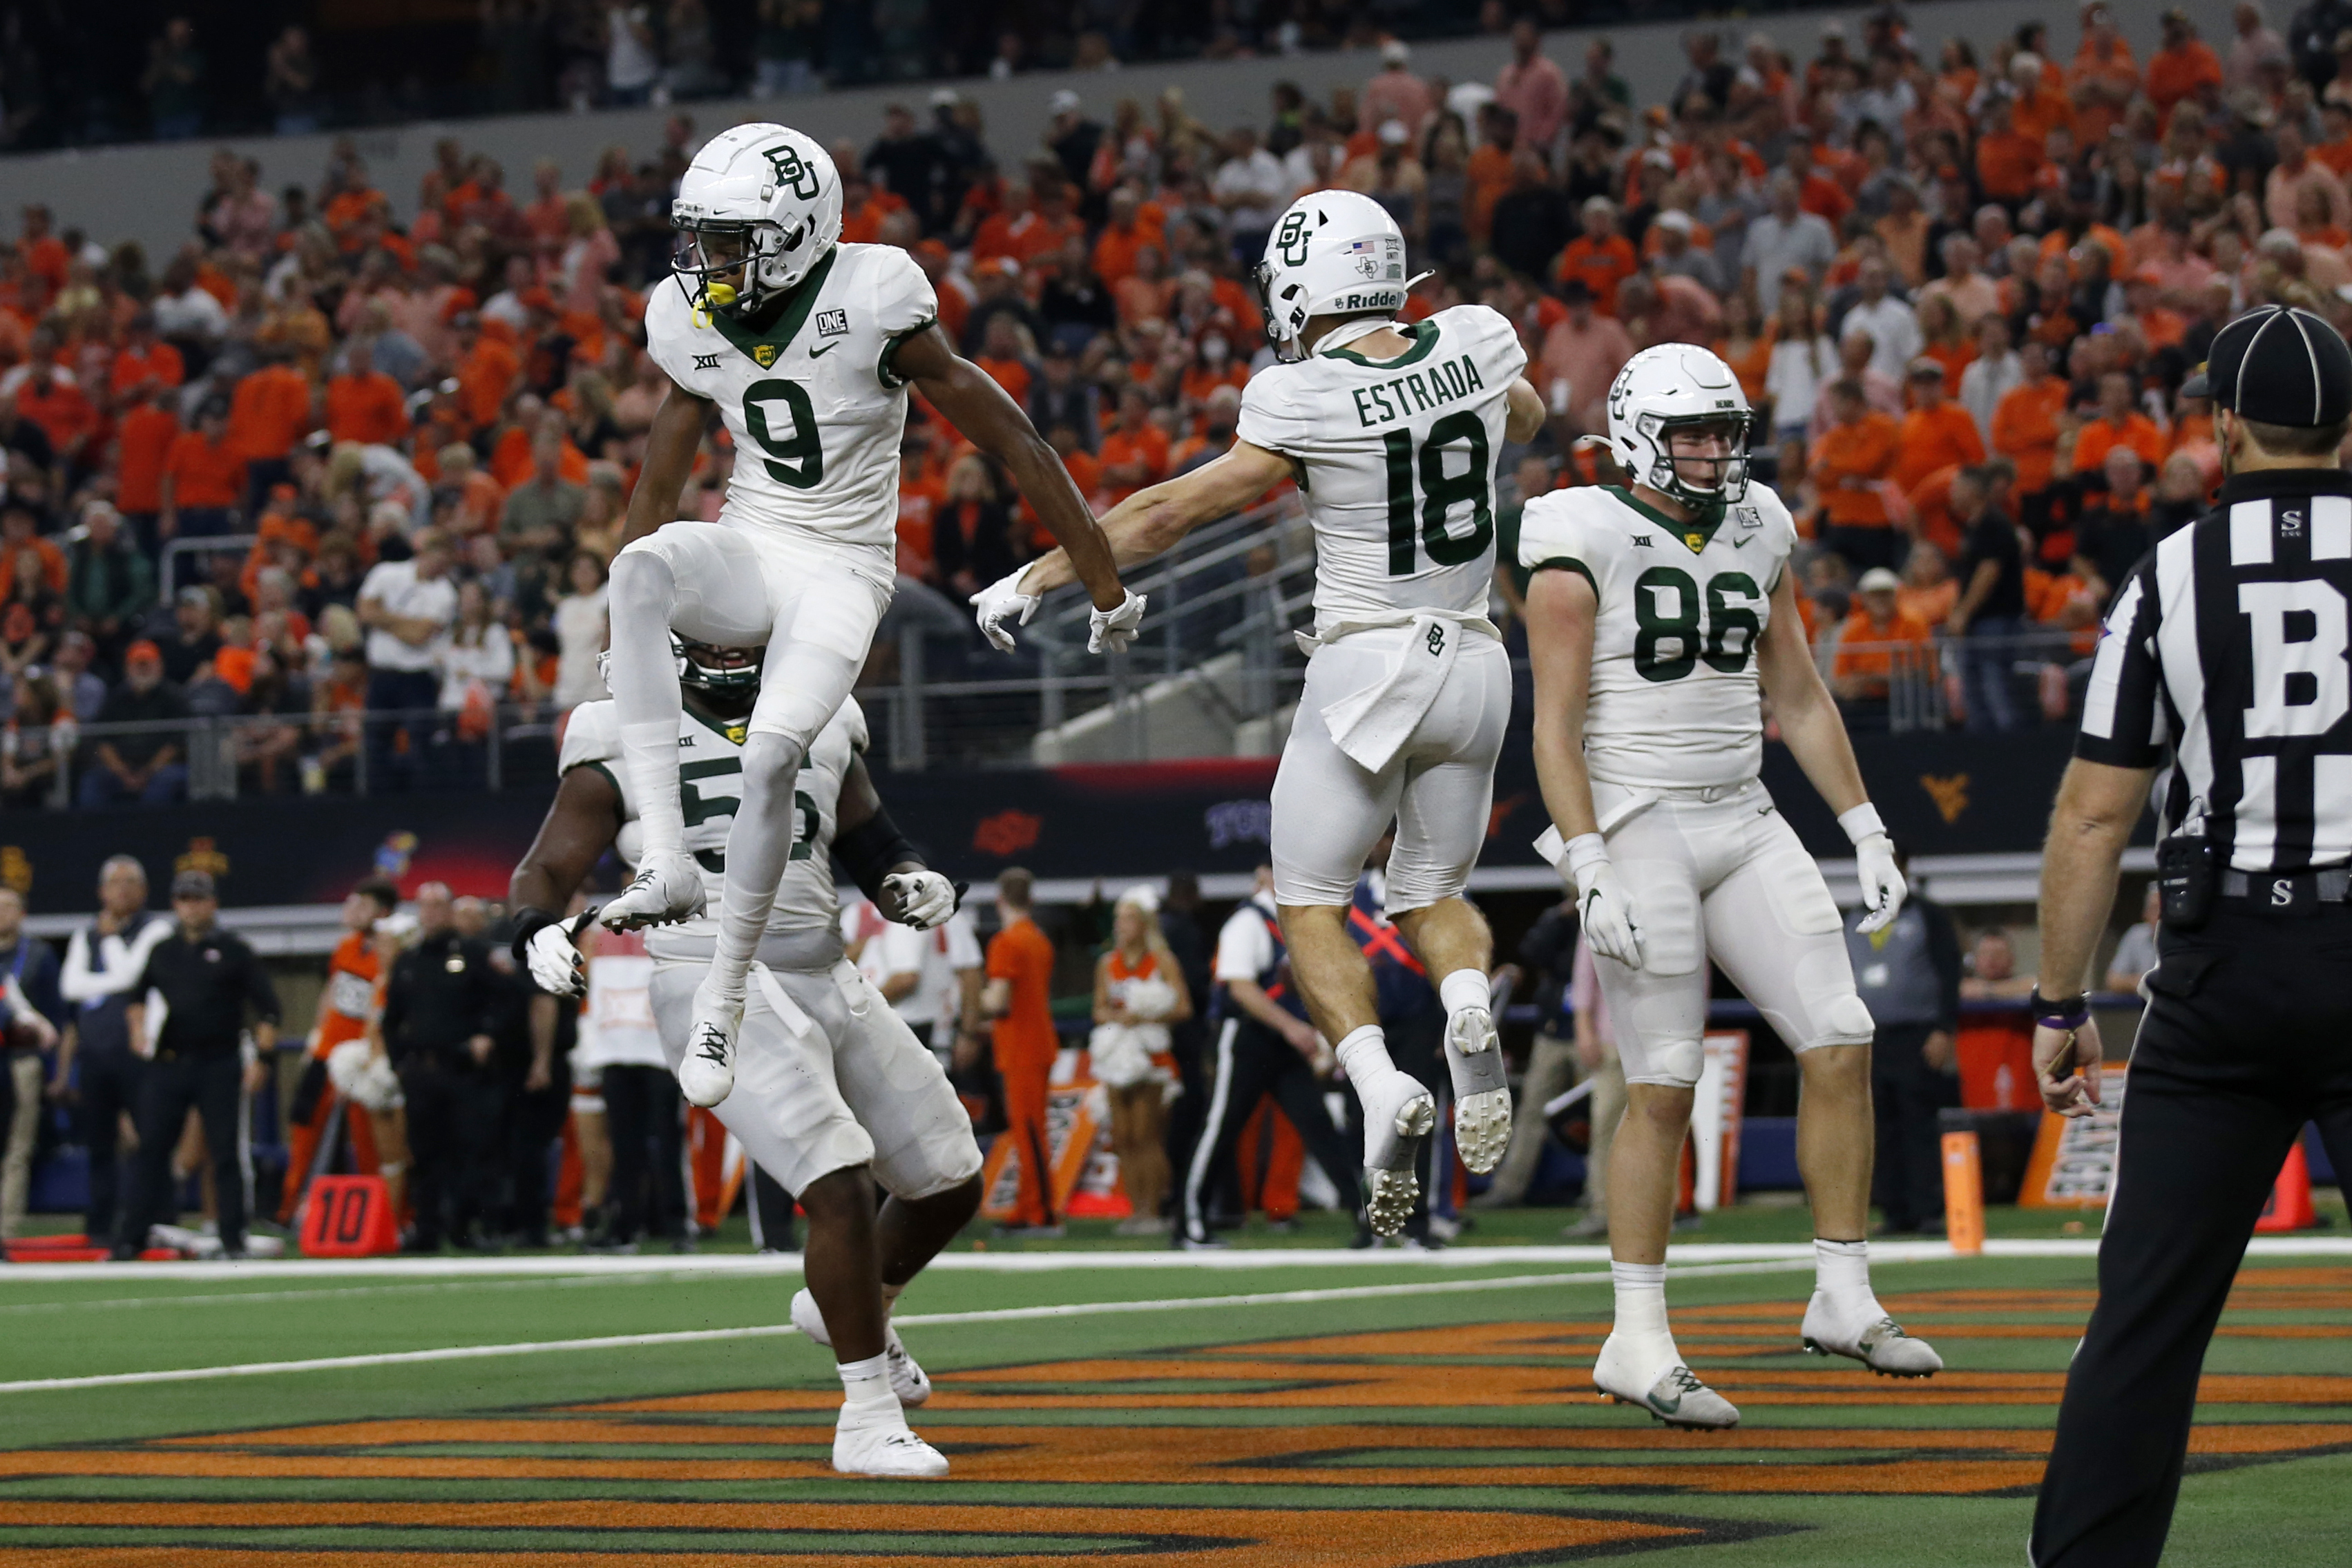 Baylor Upsets Oklahoma State in Big 12 Title Game as Cowboys' CFP Hopes Fade